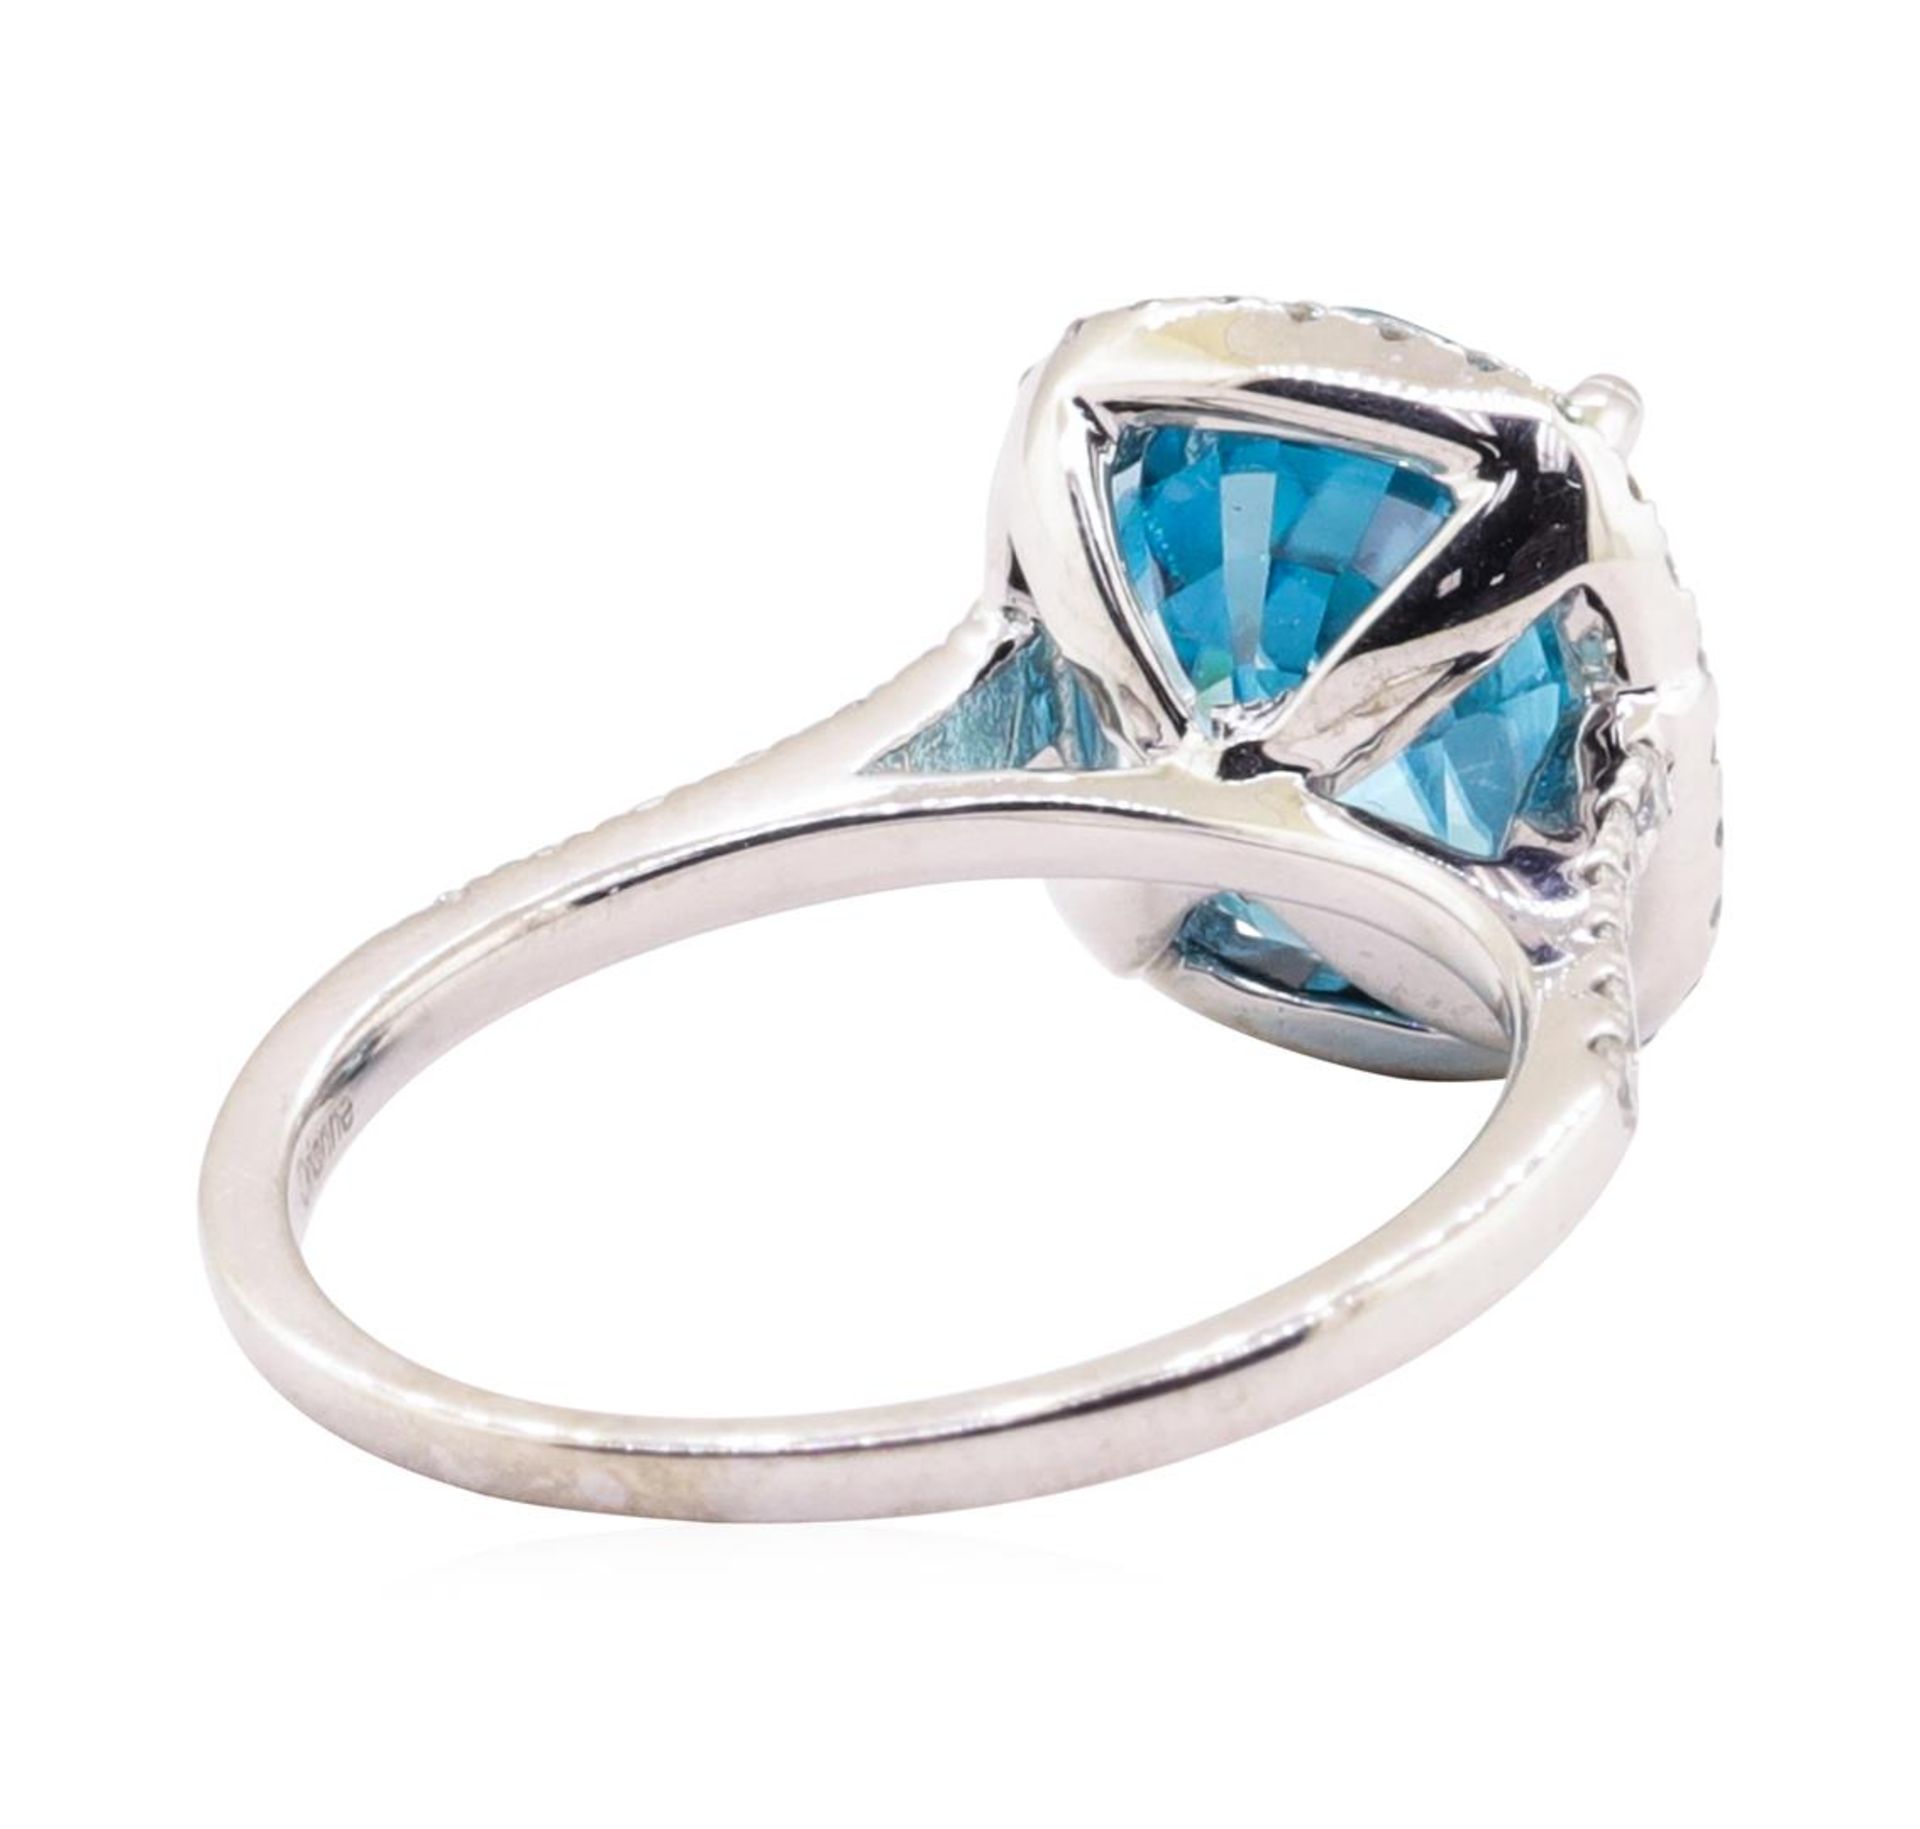 4.46 ctw Blue Zircon and Diamond Ring - 14KT White Gold - Image 3 of 5